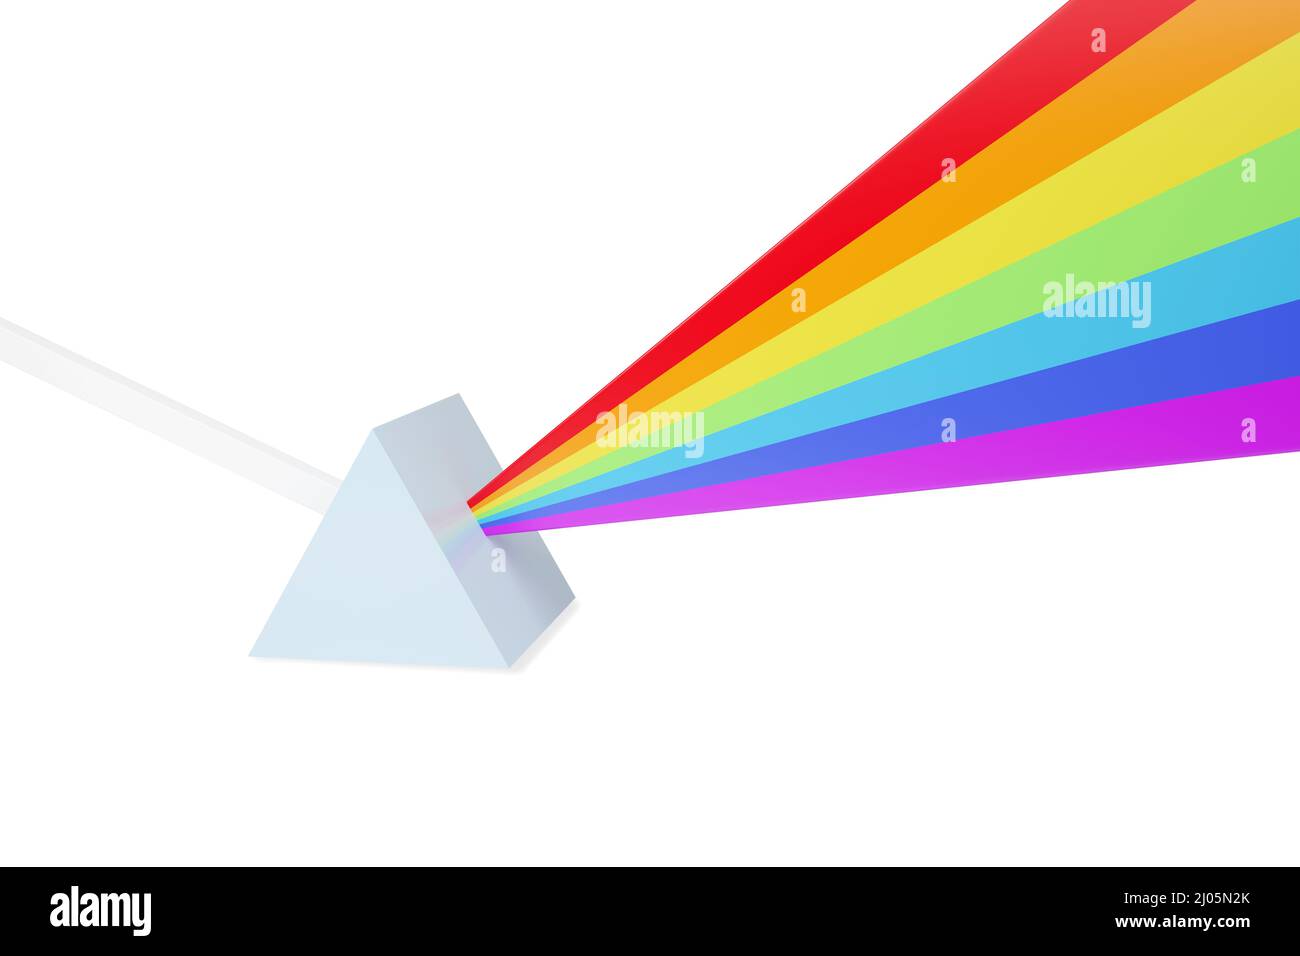 Abstract representation of a ray of light hitting a prism and dispersing into a spectrum of colors. 3d illustration. Stock Photo